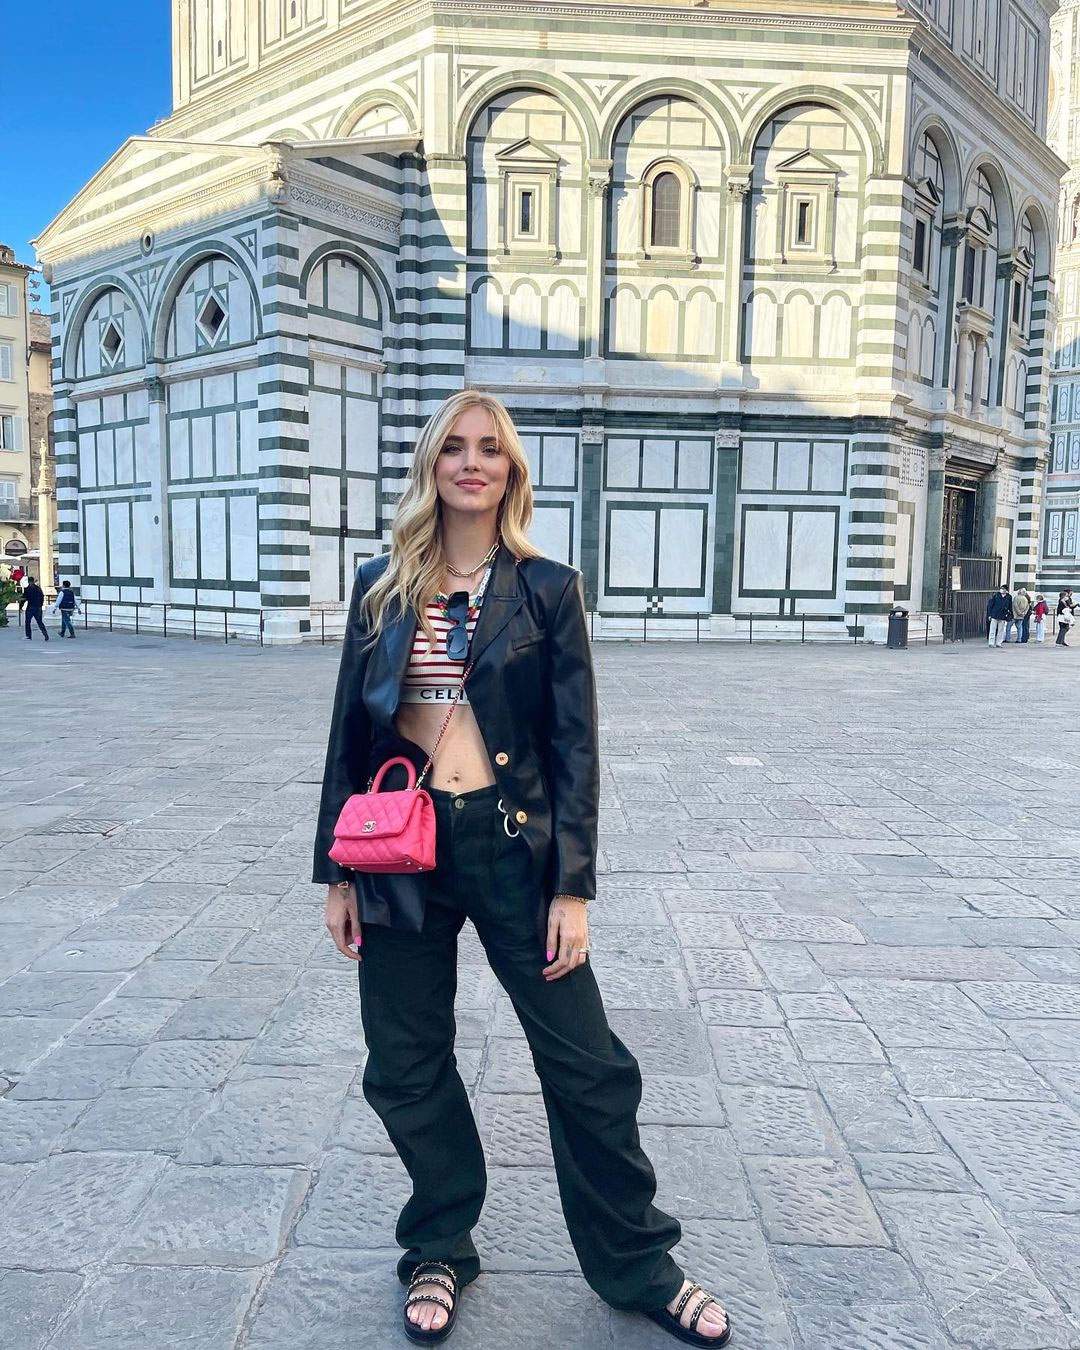 Florence wants to relaunch its museums with Chiara Ferragni? And... is she doing it right?